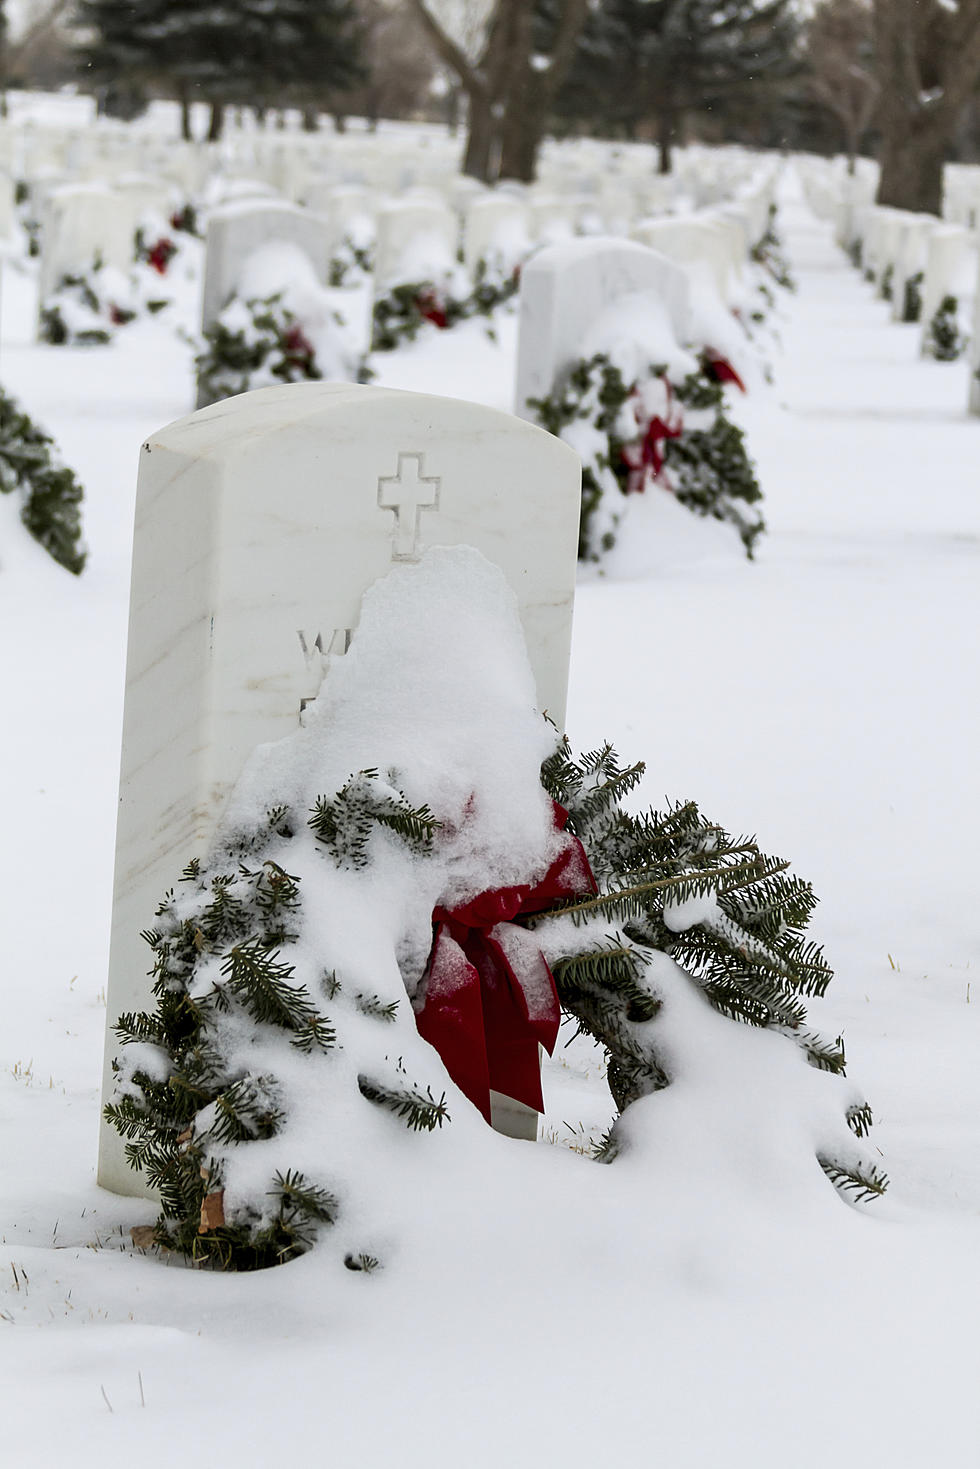 Wreaths Across America Make Stops In Old Orchard Beach and Kittery Today